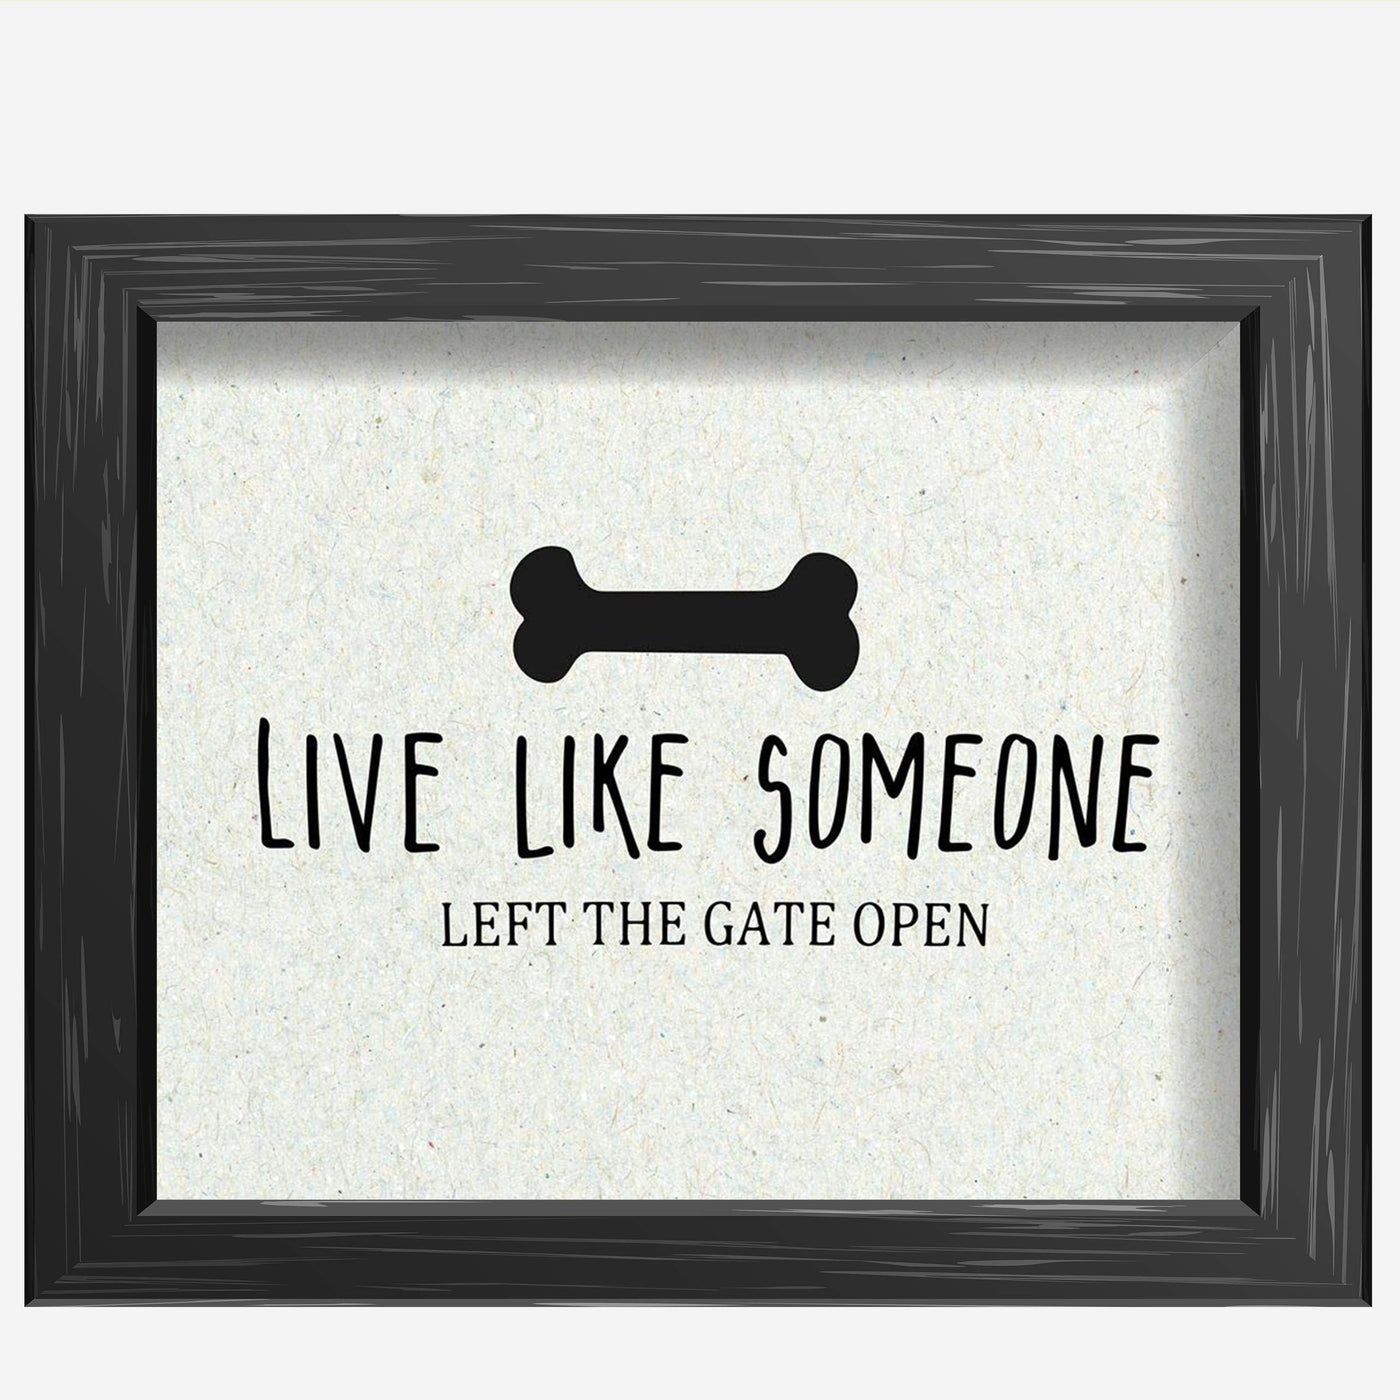 Live Like Someone Left the Gate Open-Funny Pet Wall Art Sign-10 x 8" Print Wall Decor-Ready to Frame. Modern Typographic Art Print for Home-Store-Vet's Decor. Humorous Sign To Live Like Your Pet!